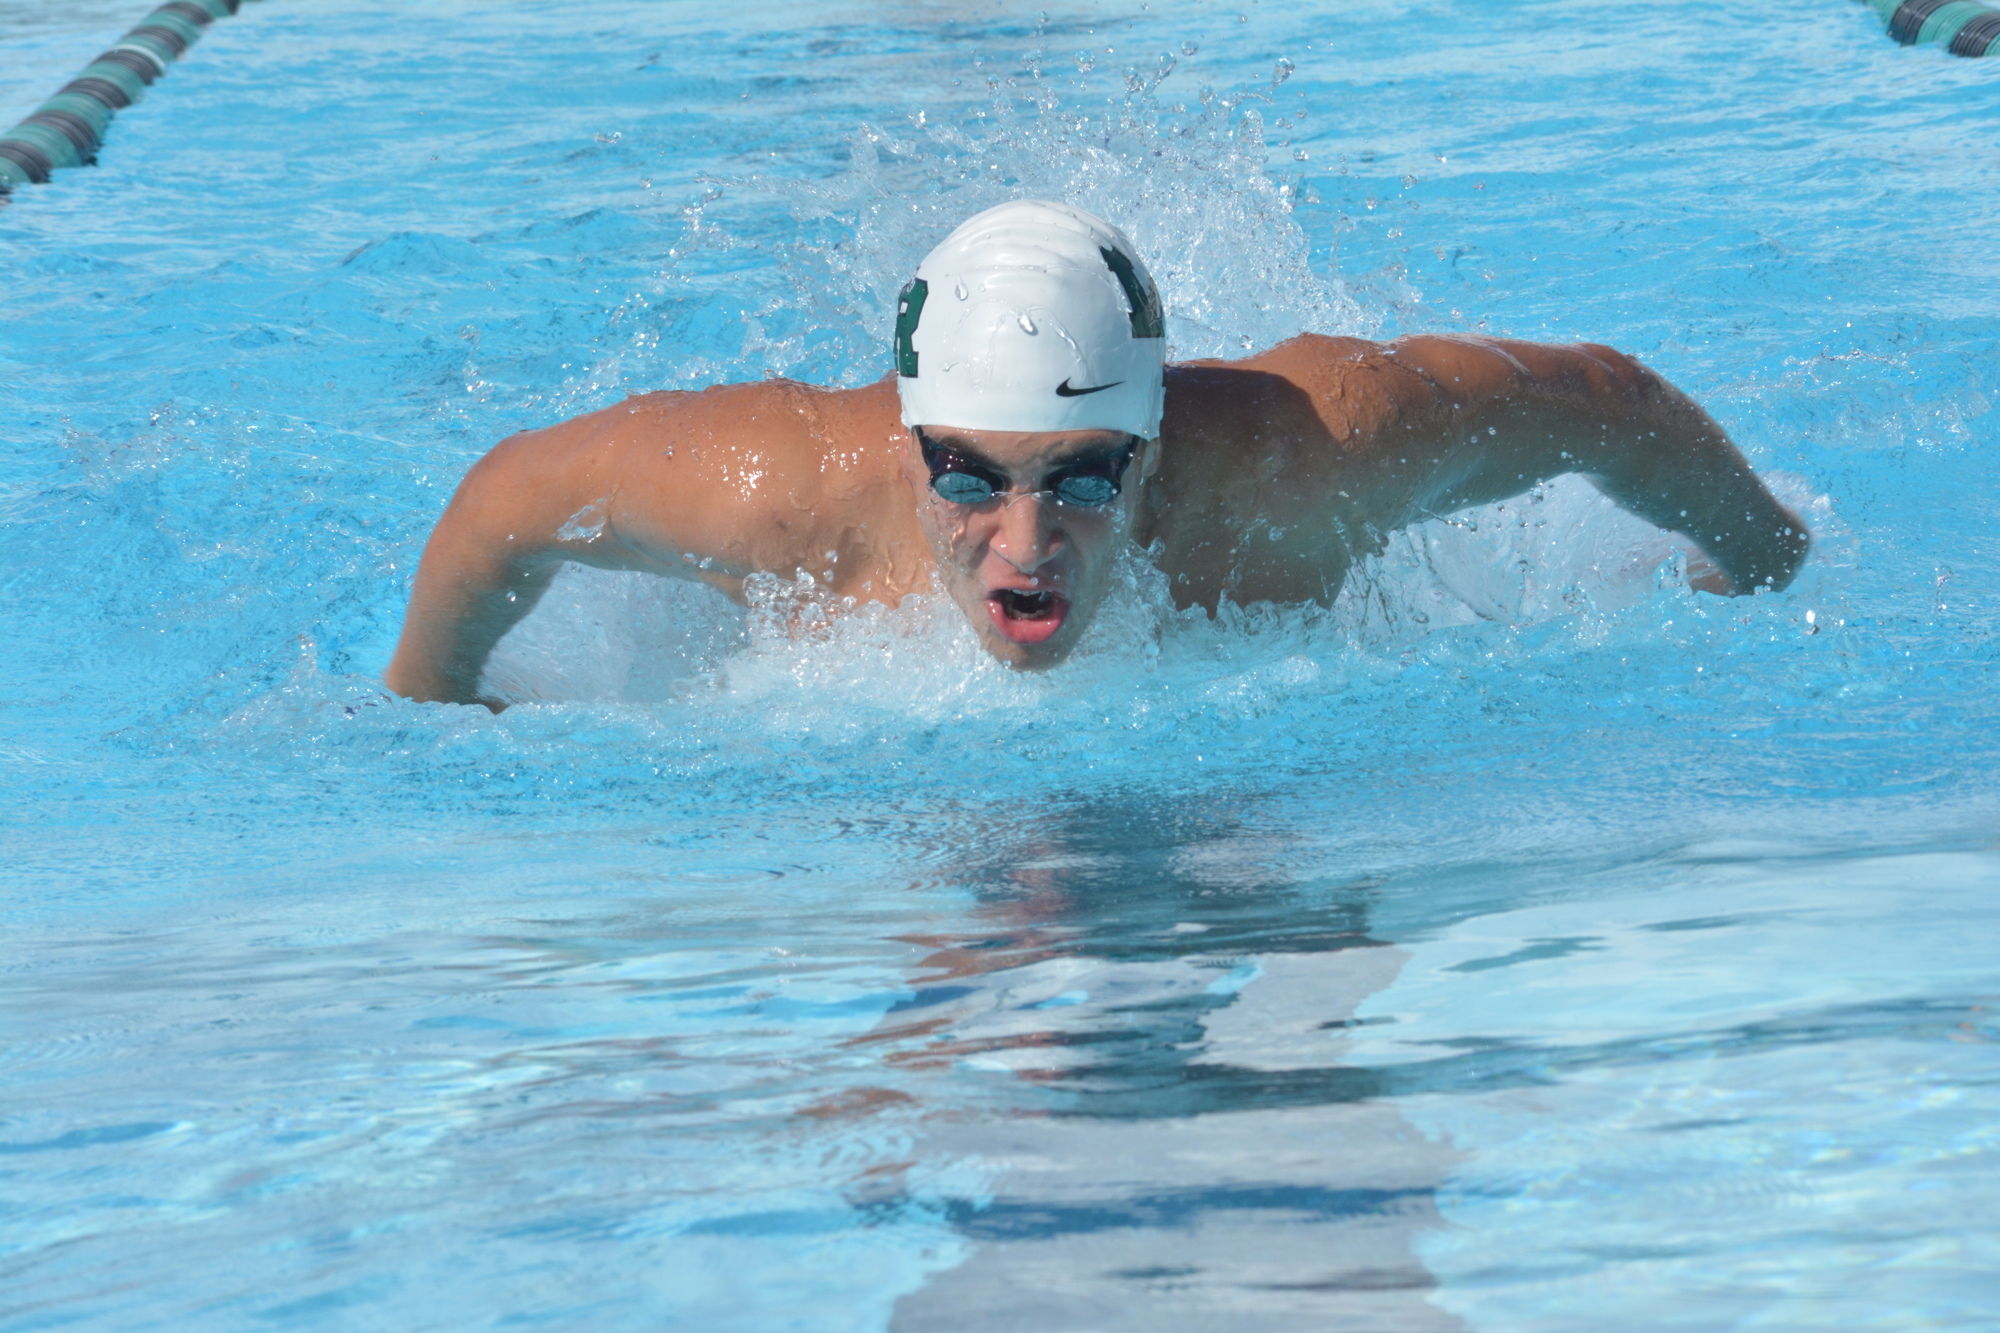 5. Lakewood Ranch senior boys swimmer Sebastian Aguirre took silver in the 100-meter butterfly at the state meet.